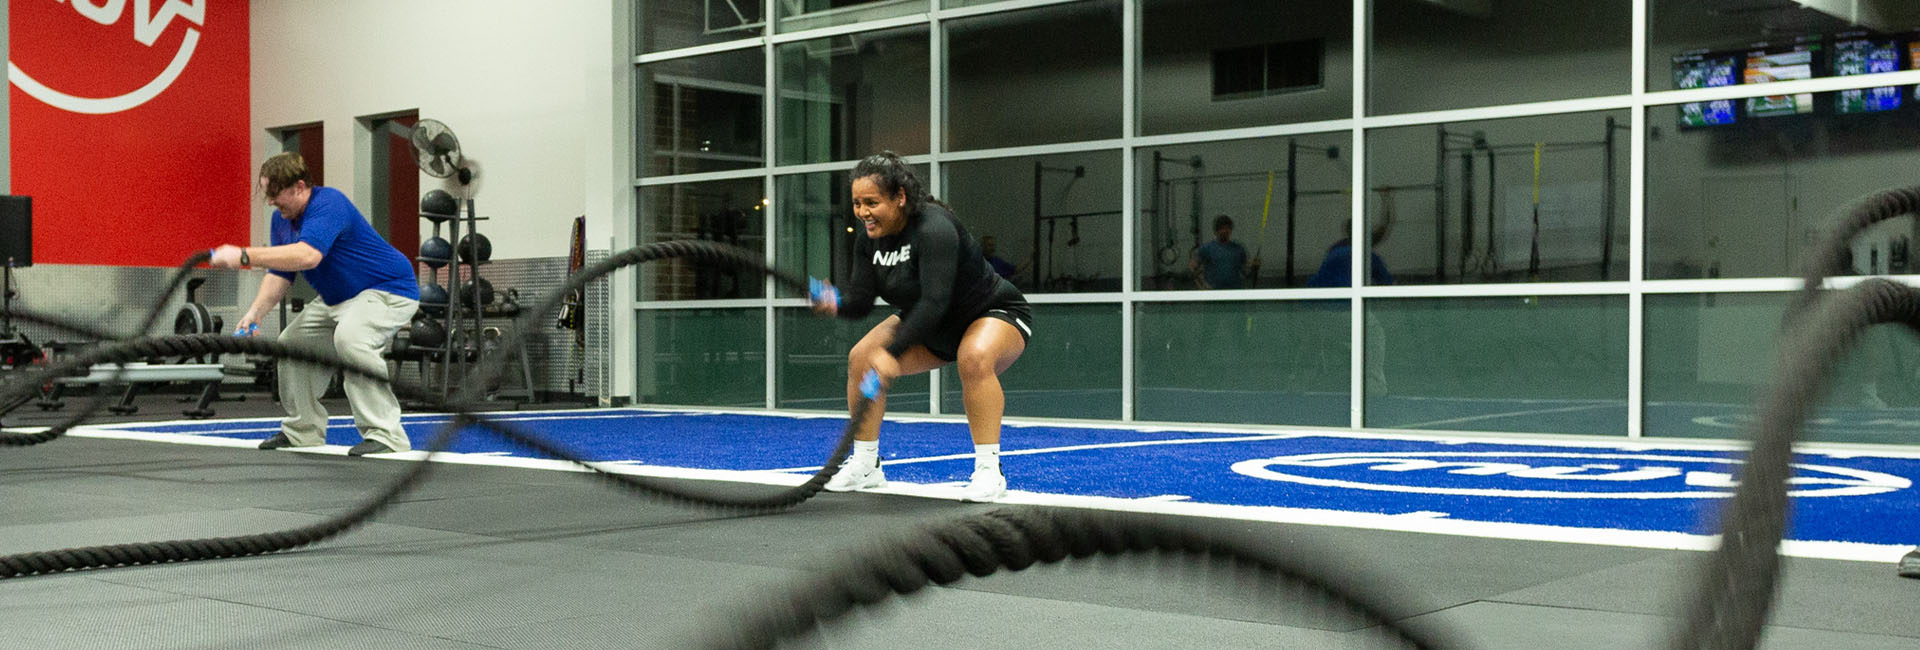 battle ropes being used by a man and woman exercising at a gym in killian